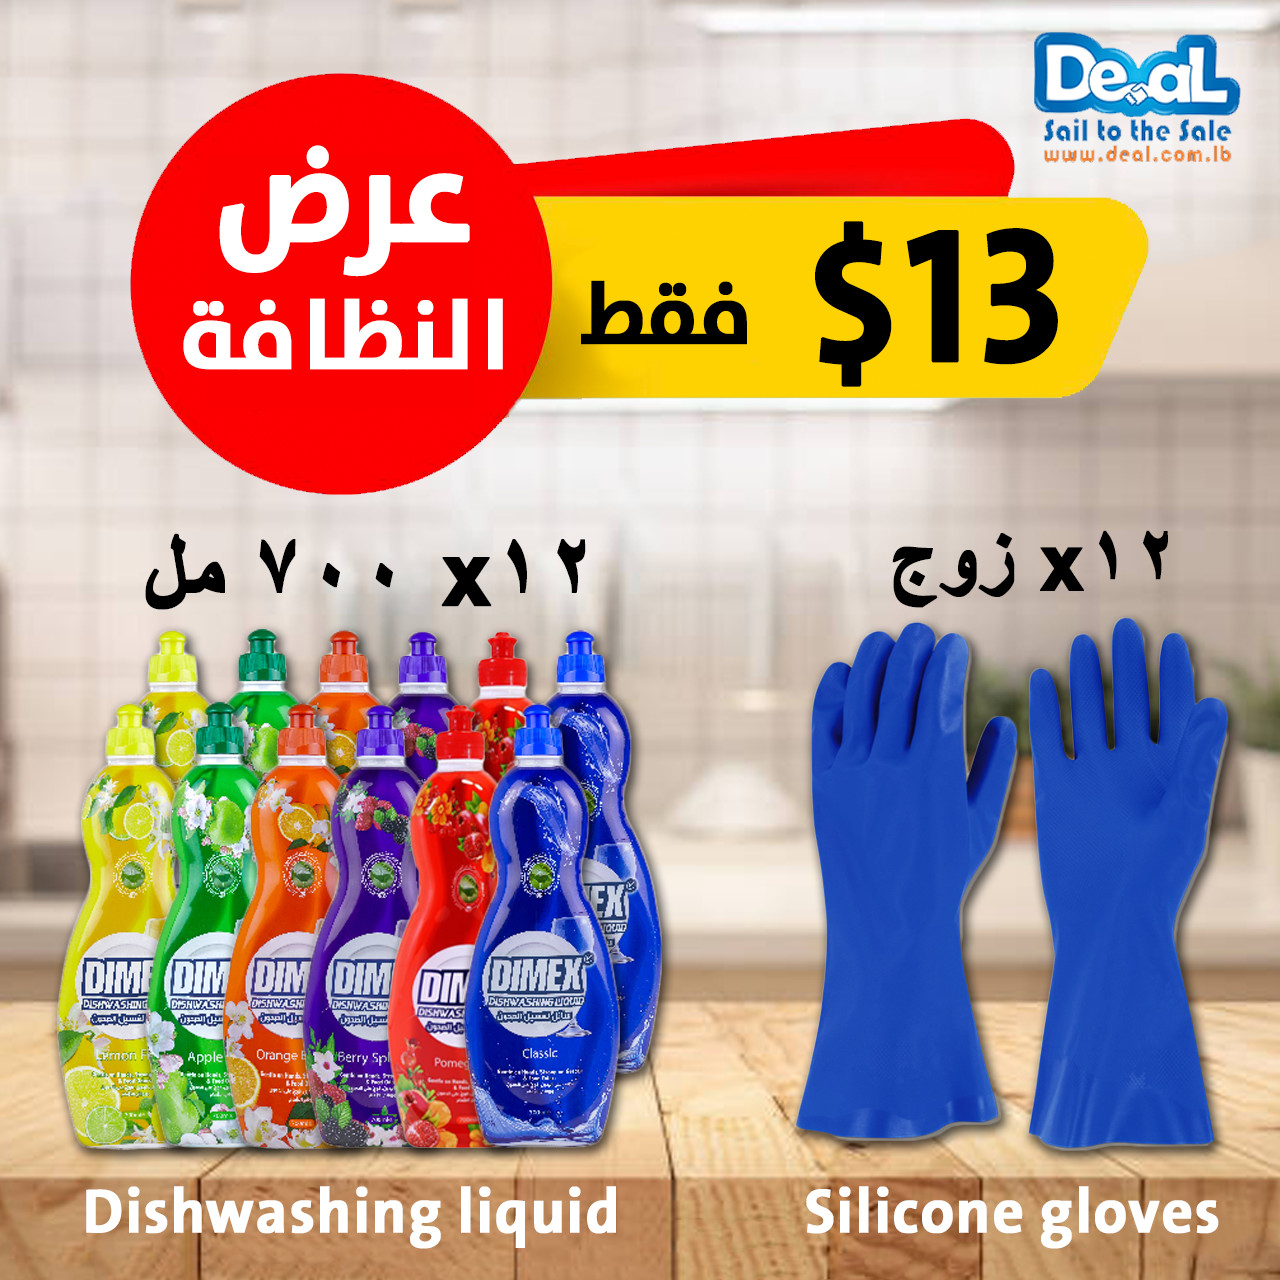 Cleaning Offer 12pcs Dimex Dishwashing Liquid + 12pair Silicone Gloves